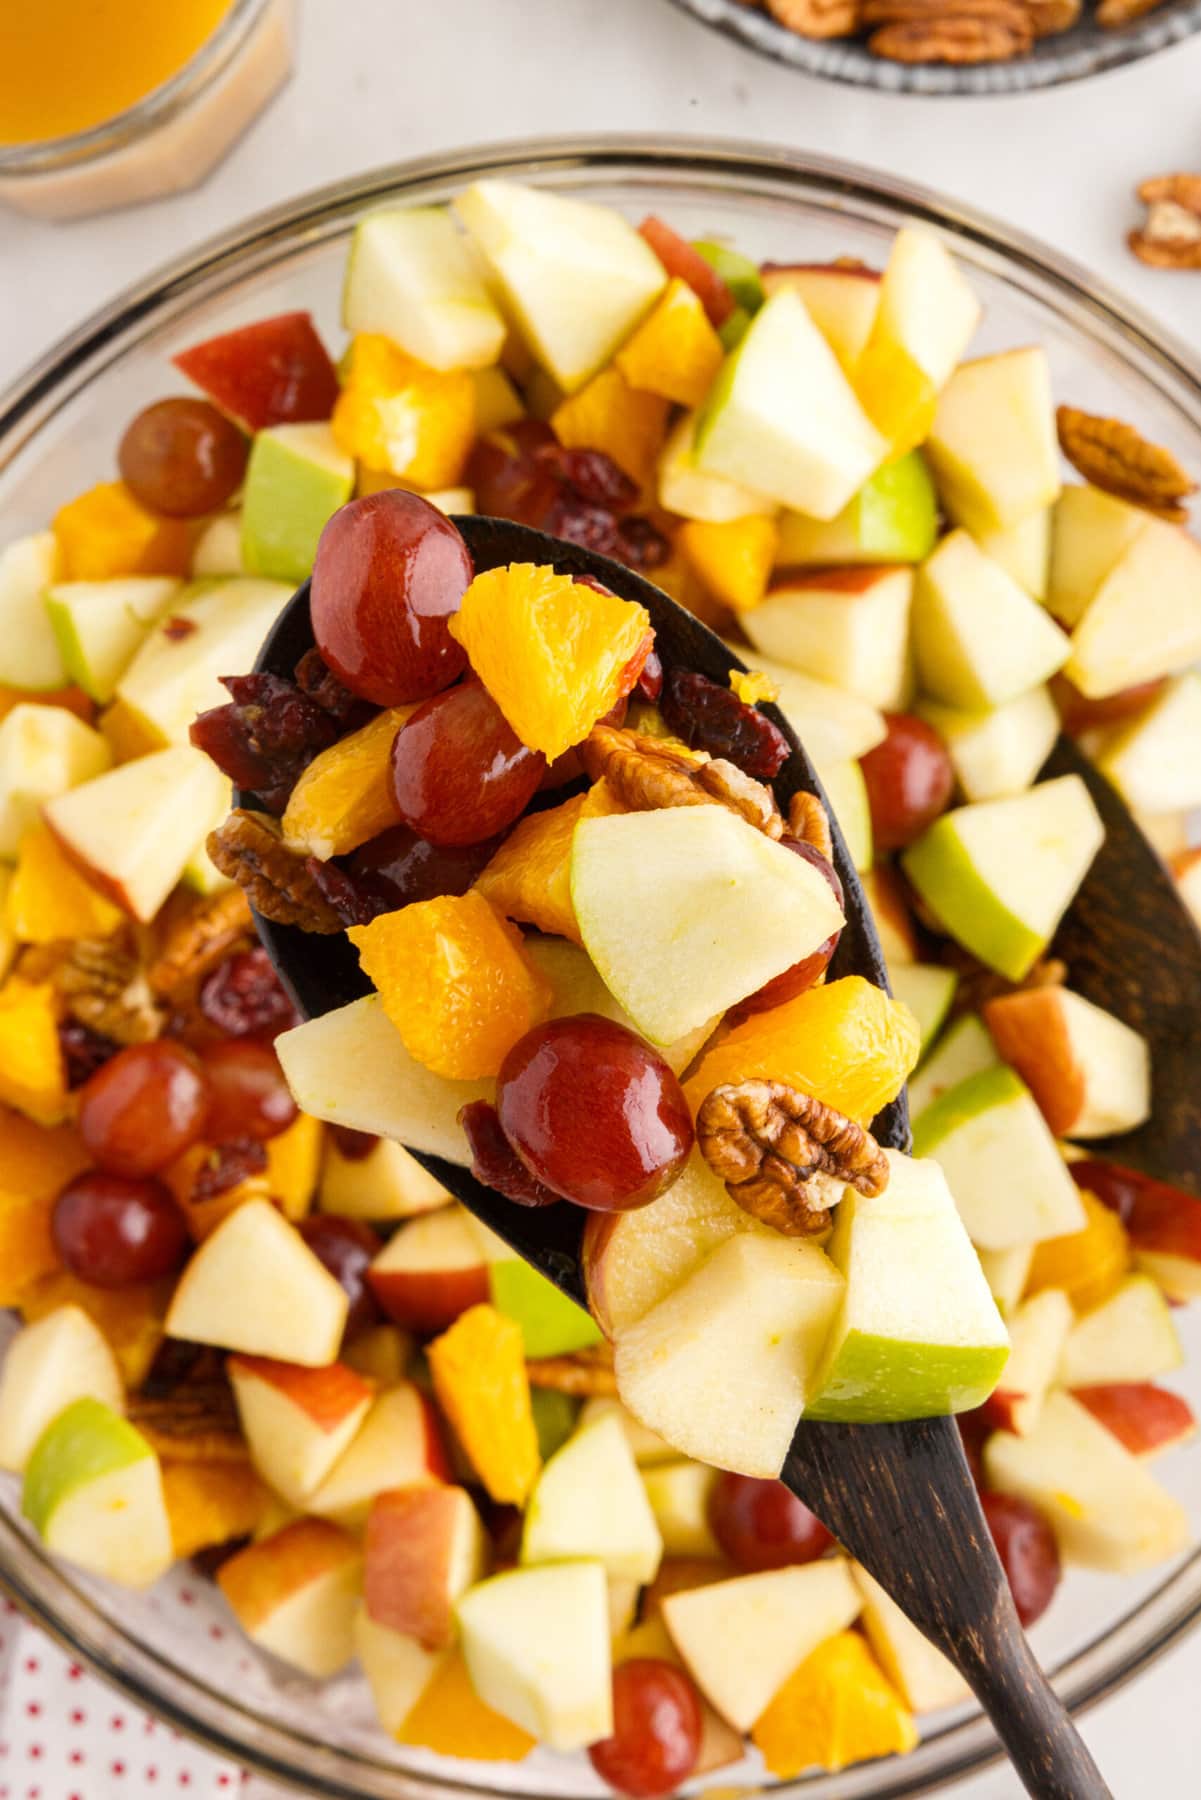 A spoonful of the Fall Fruit Salad.